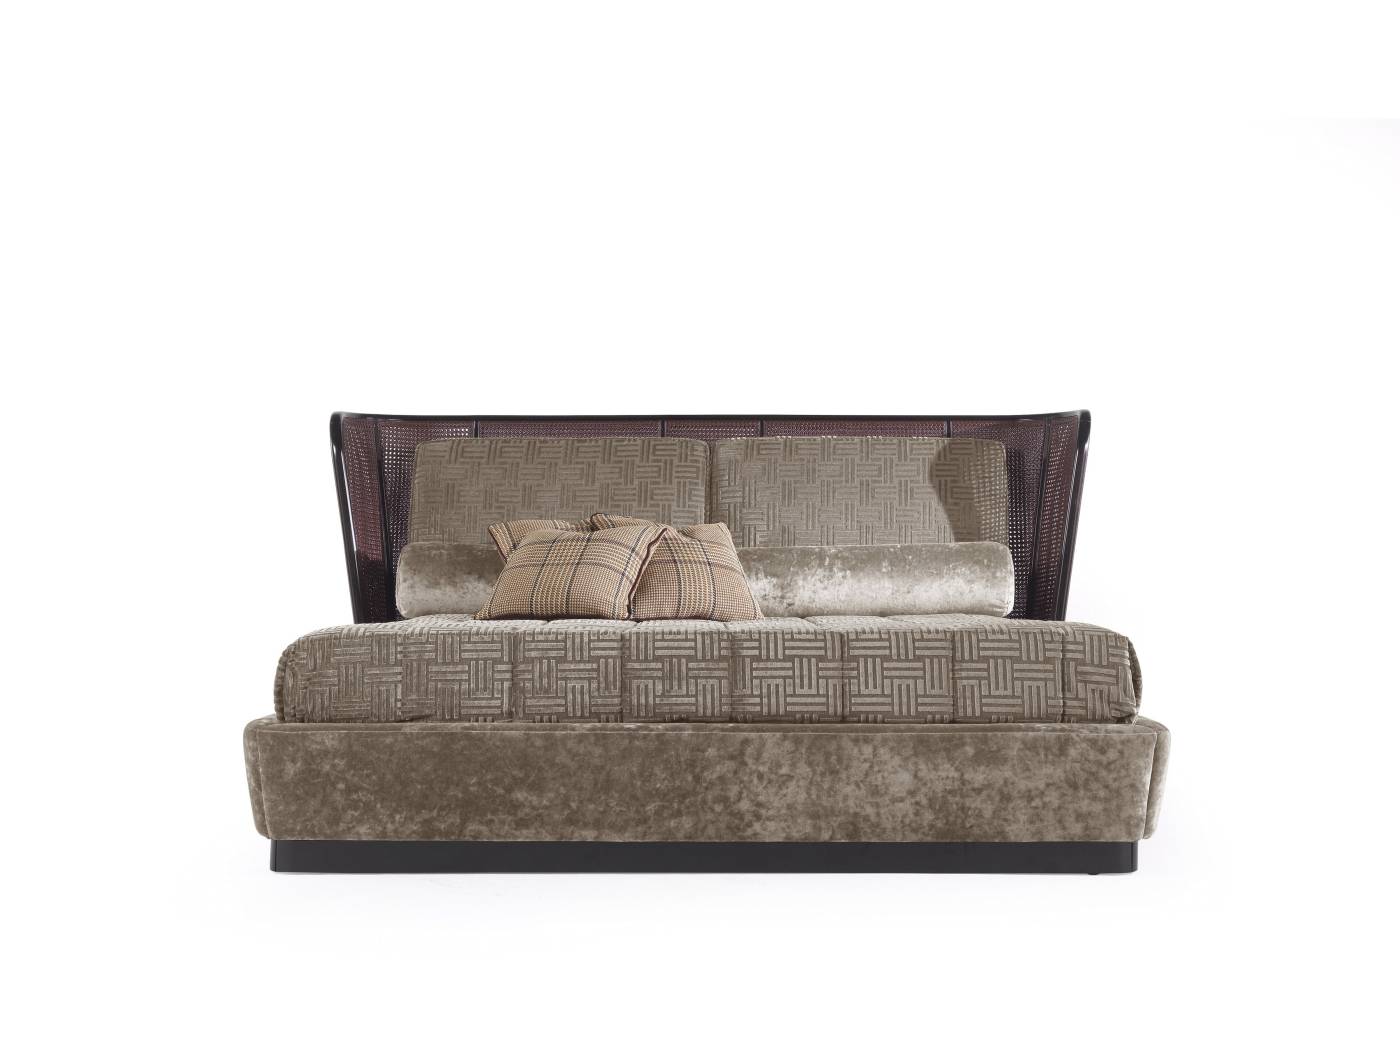 ETRO HOME INTERIORS_CARAL_bed_01.jpg